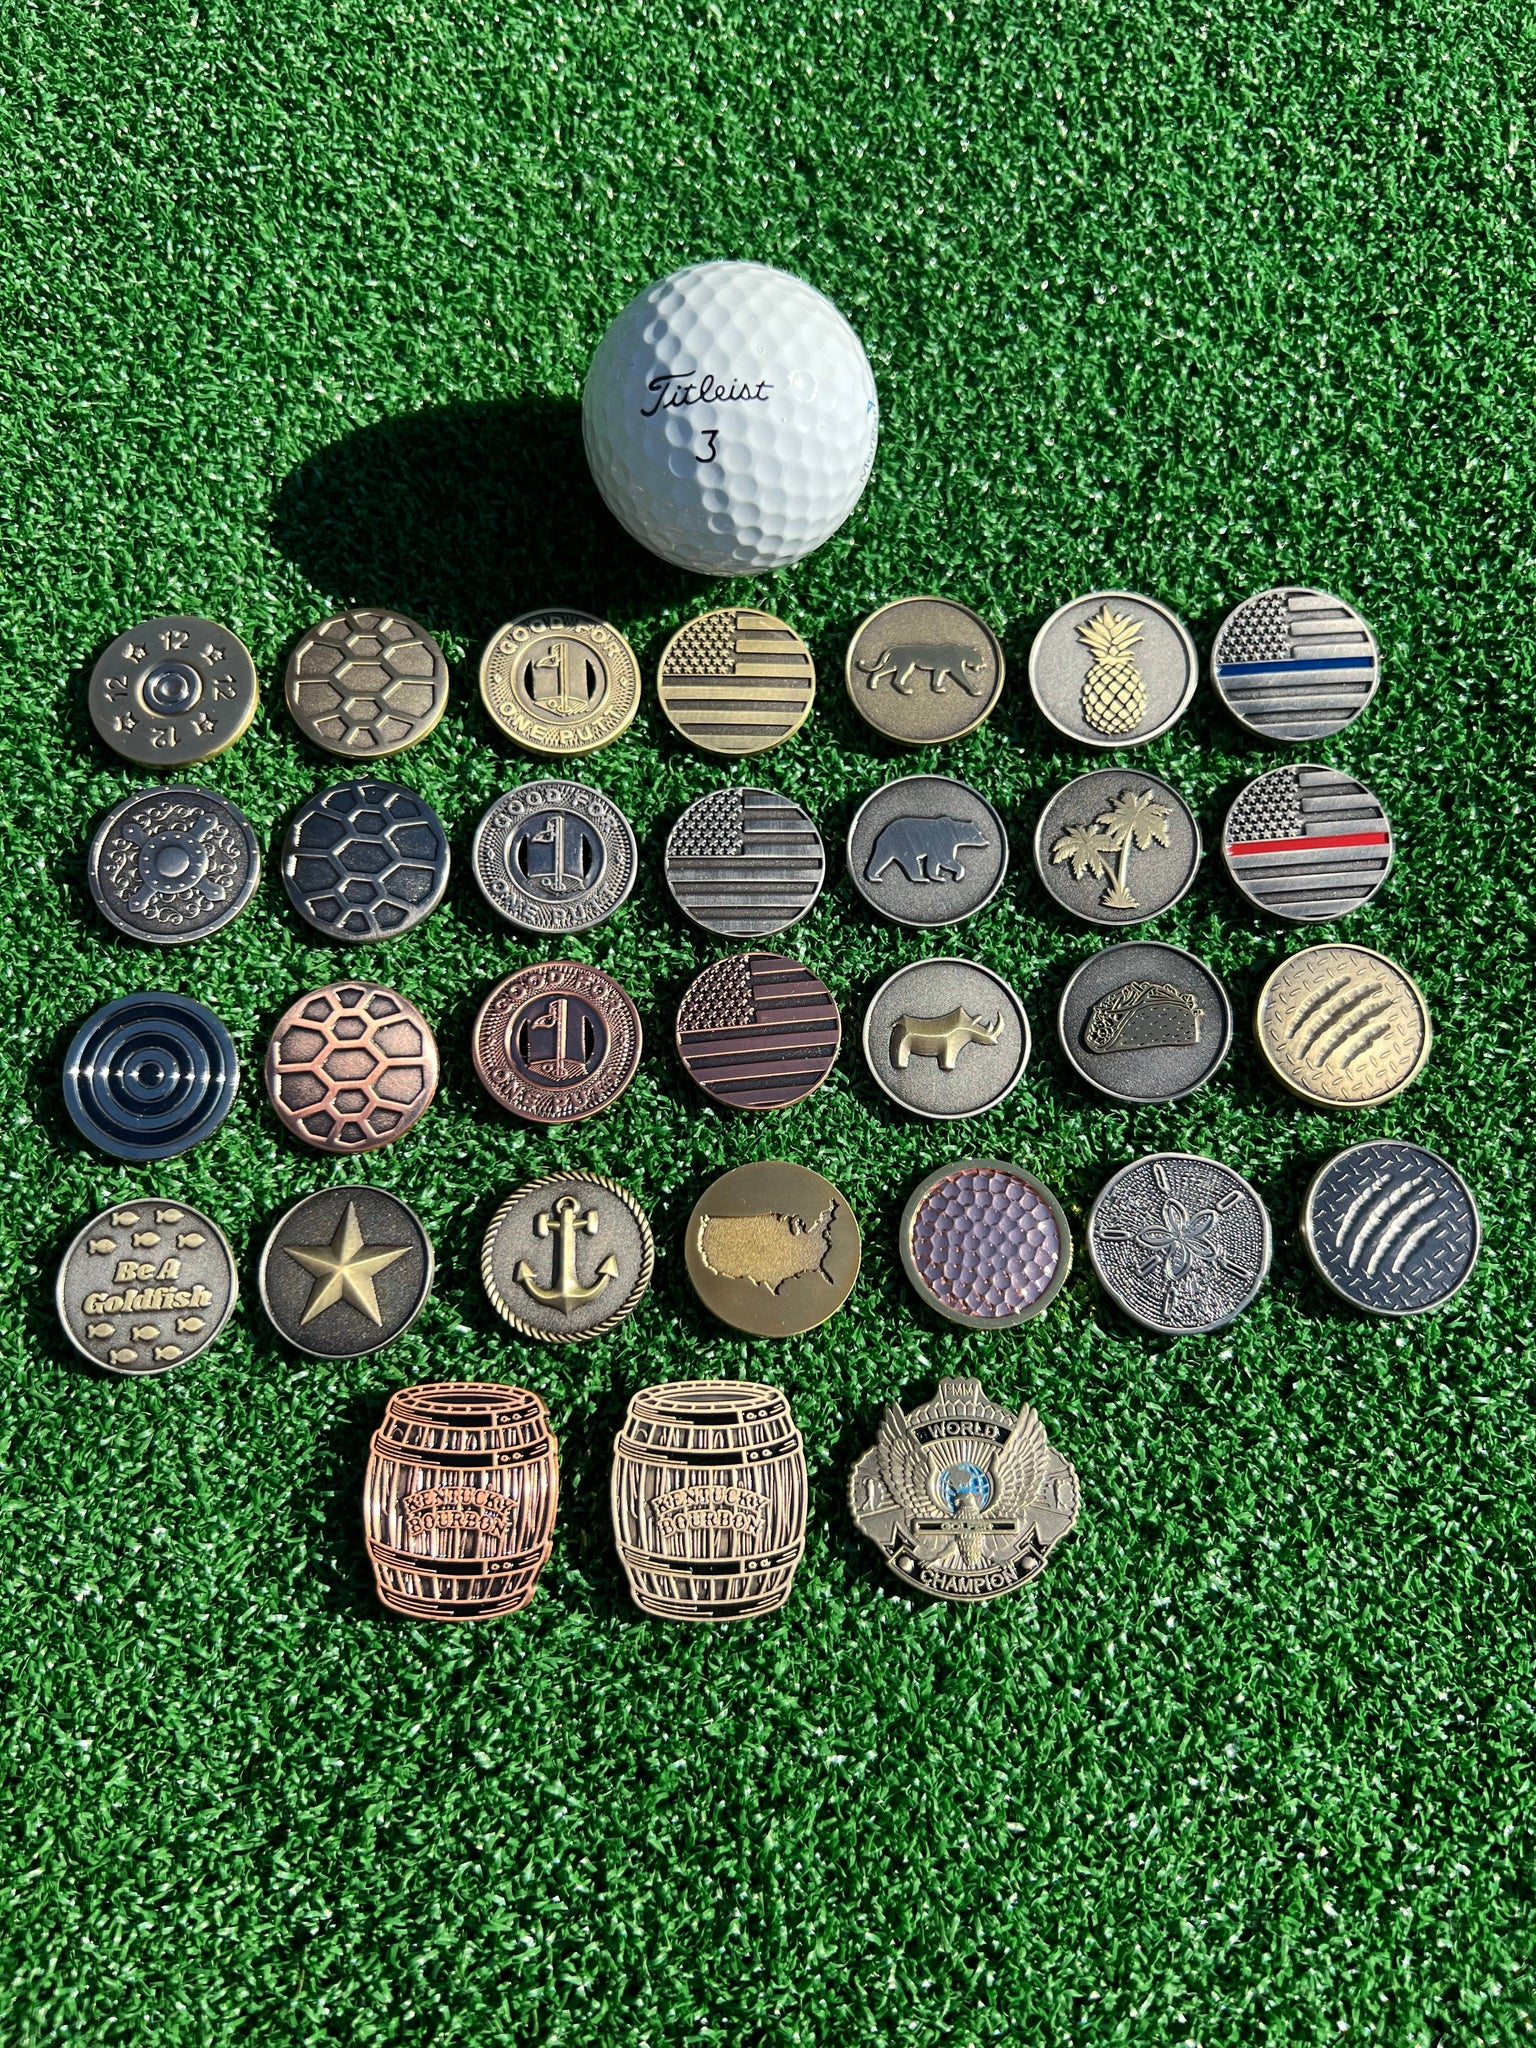 What Is a Ball Marker in Golf?